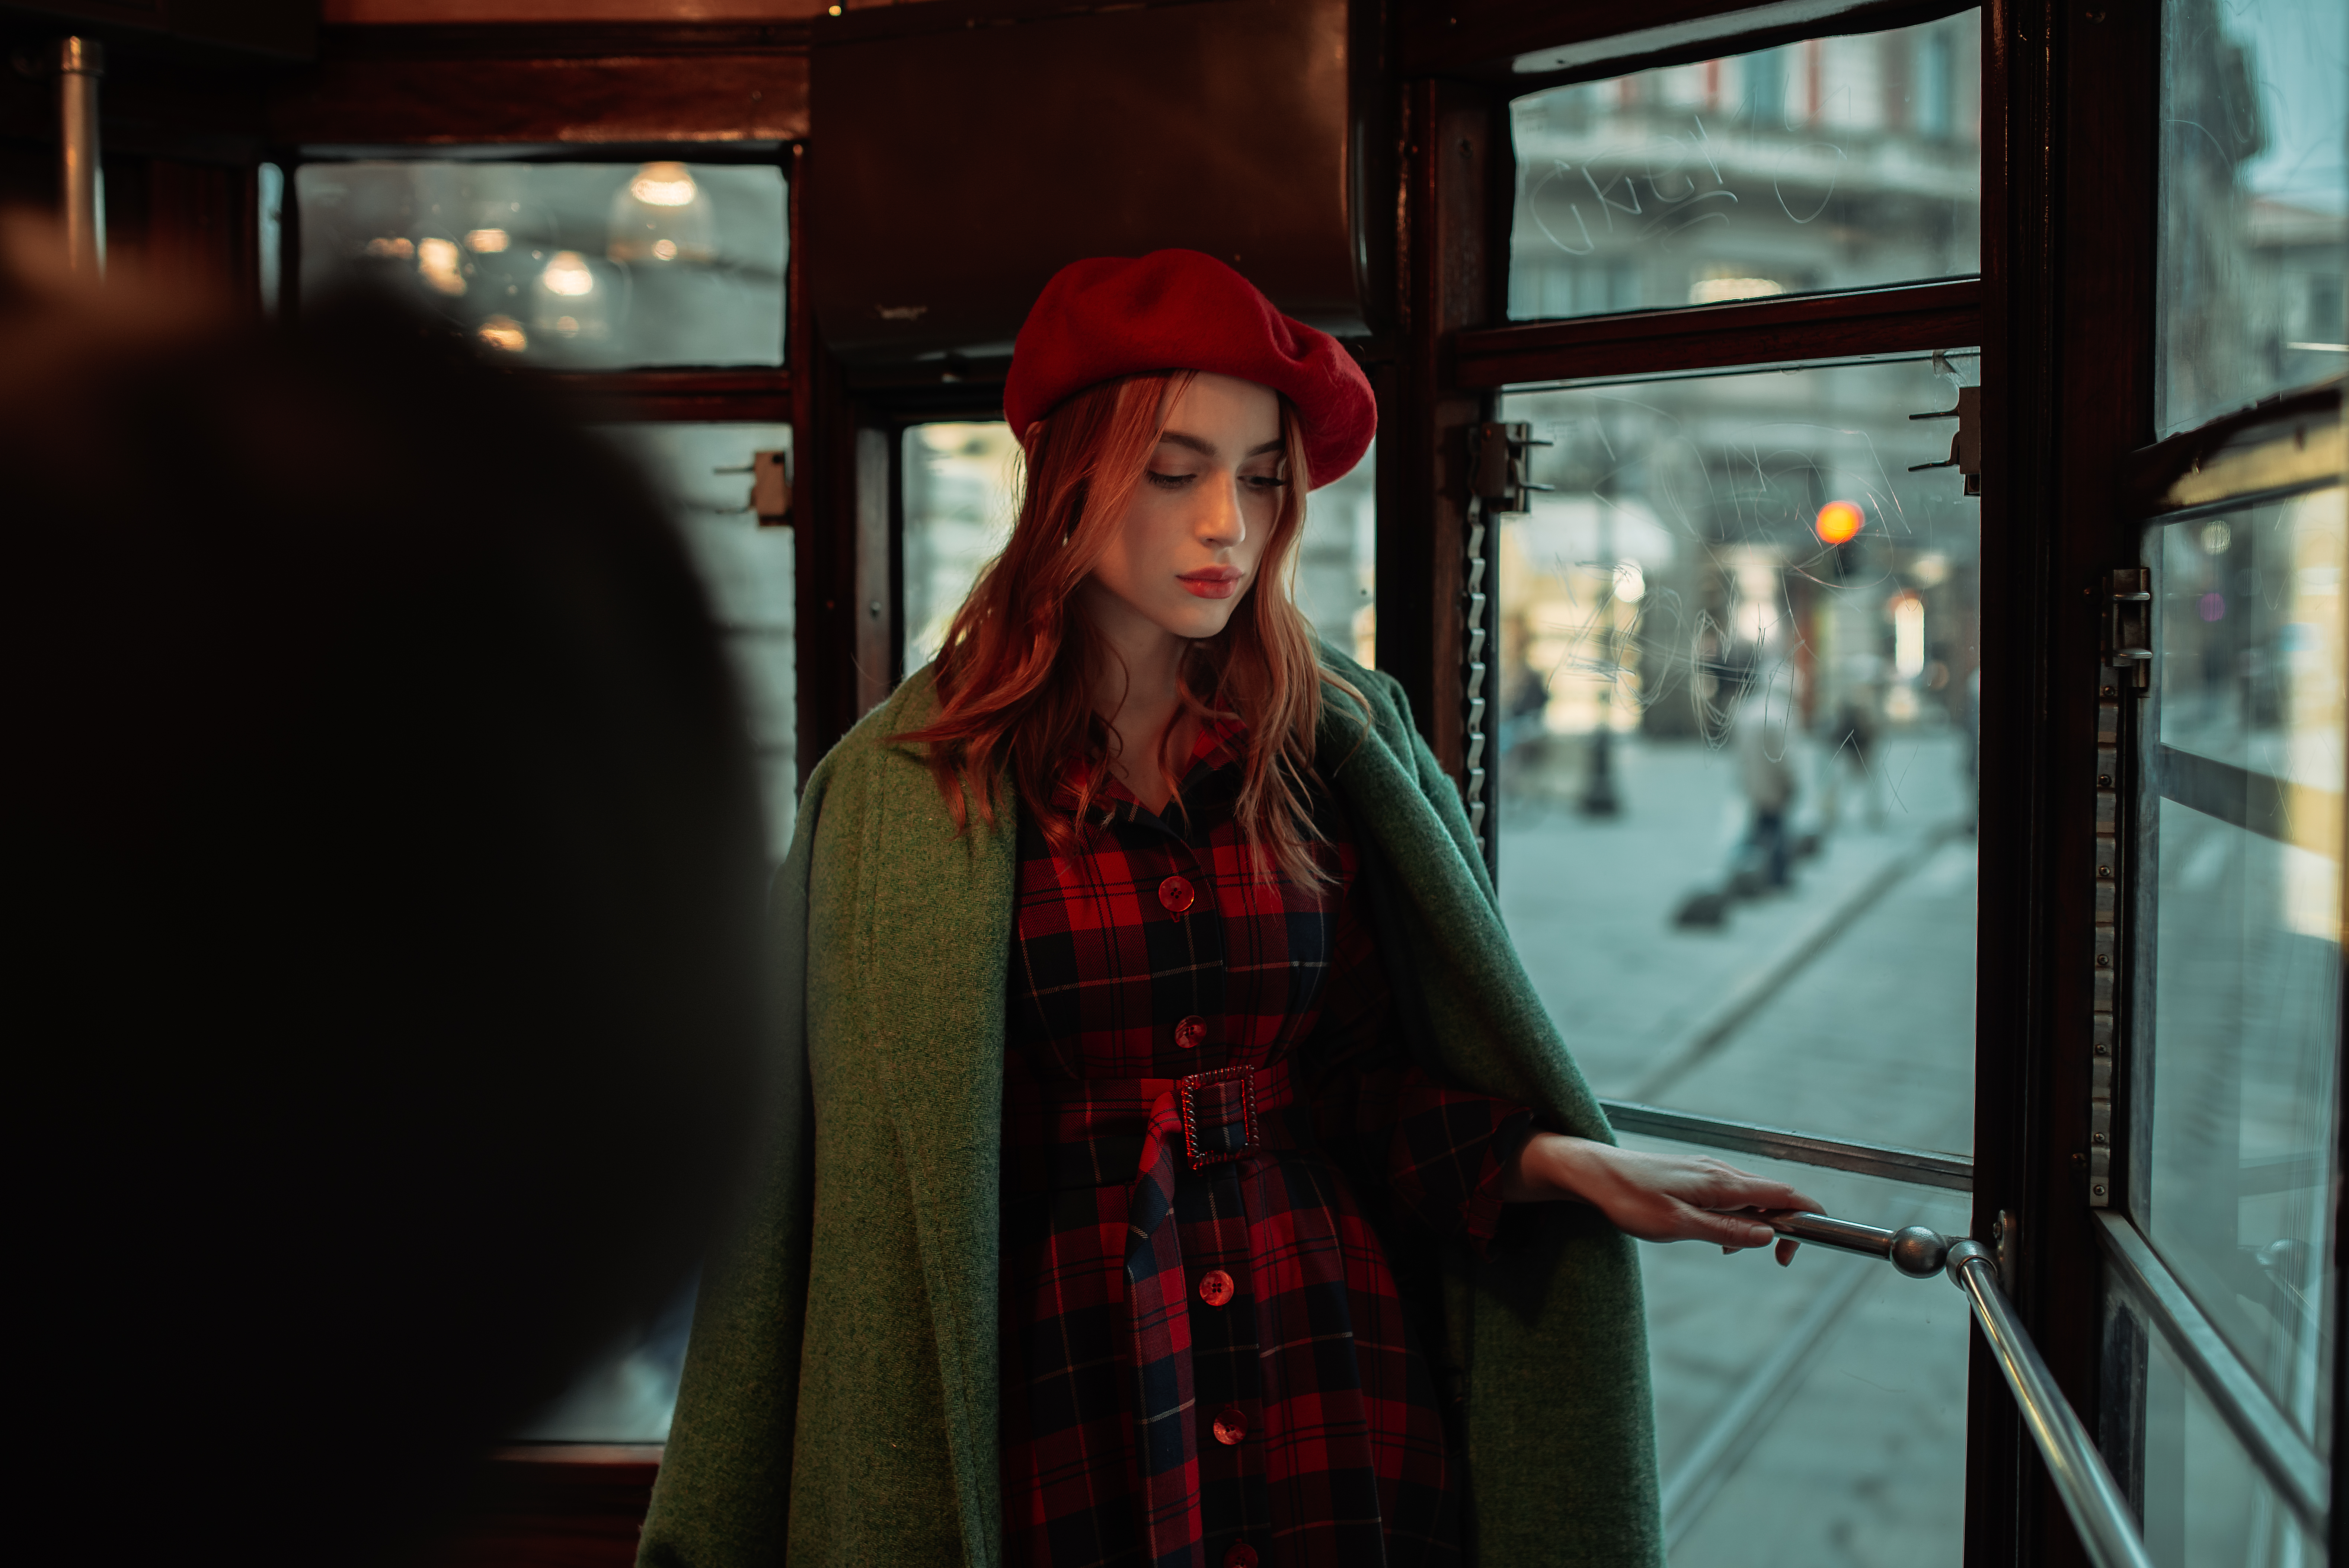 People 6312x4213 Nelb Rodrigues Milan tram portrait fashion fashion photography photography model Italy women hat women with hats looking away plaid dress red lipstick dyed hair redhead